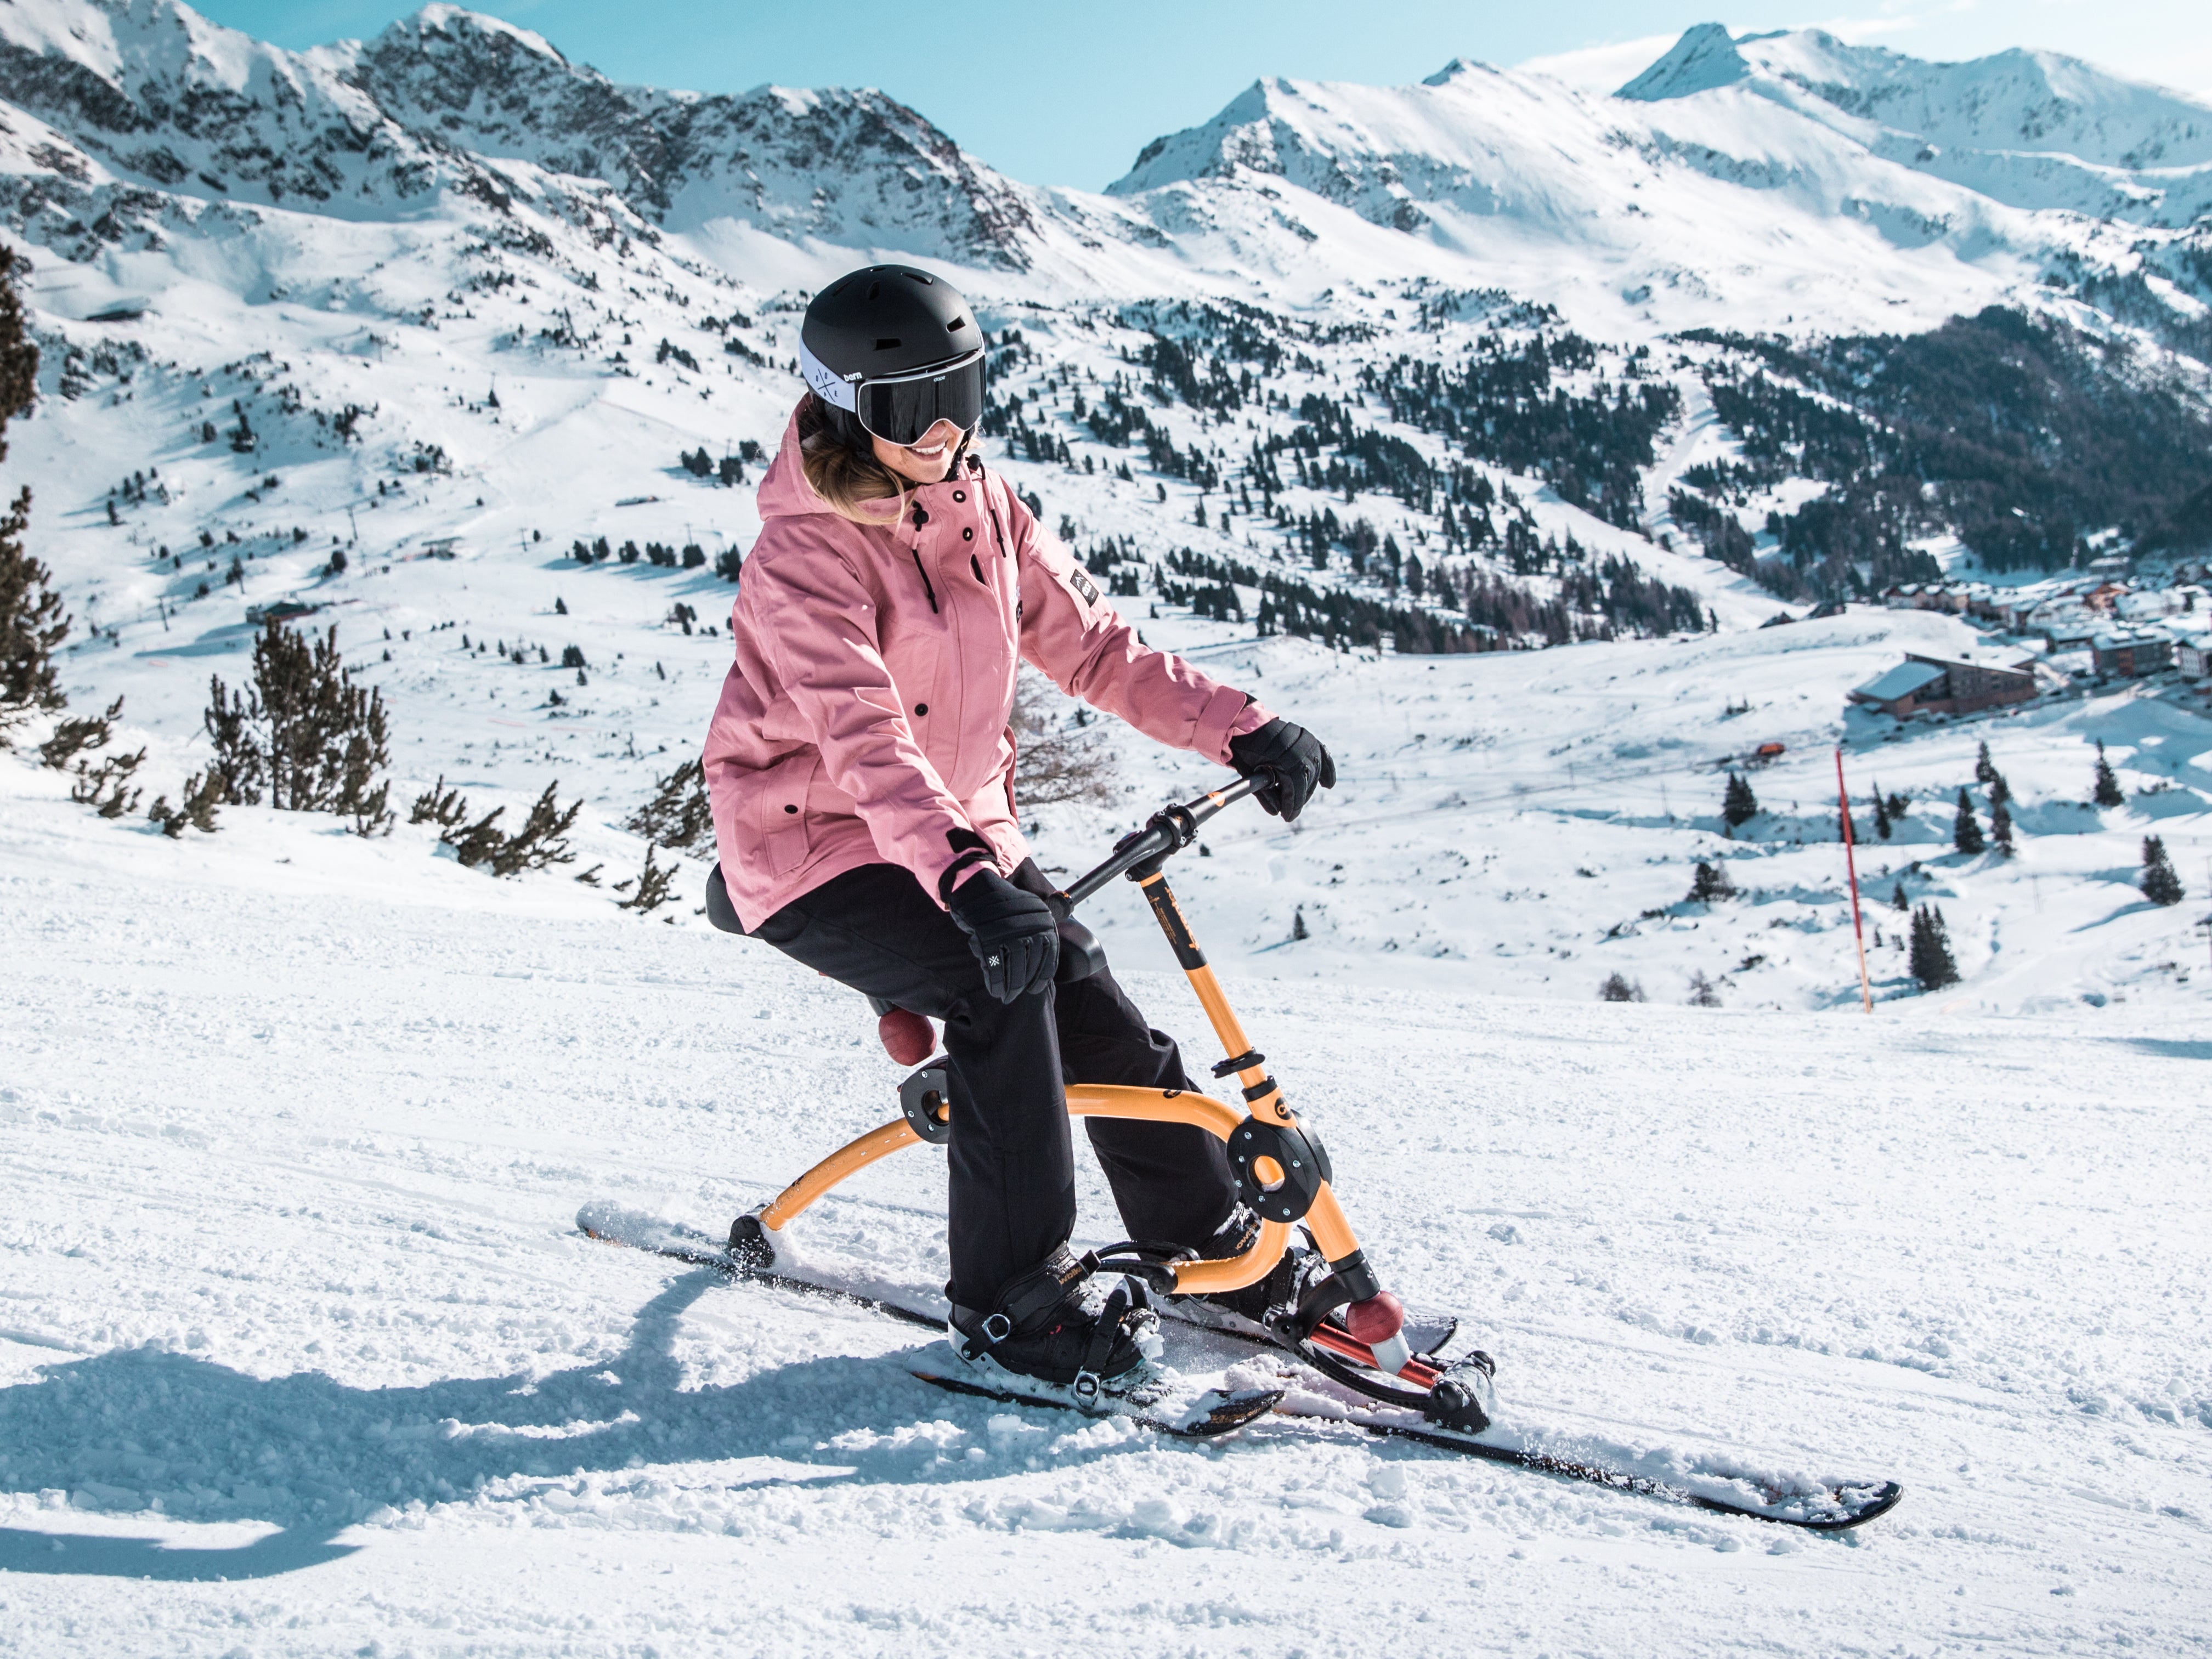 Snowbikes are great alternatives for those who aren’t too experienced on skis or snowboards